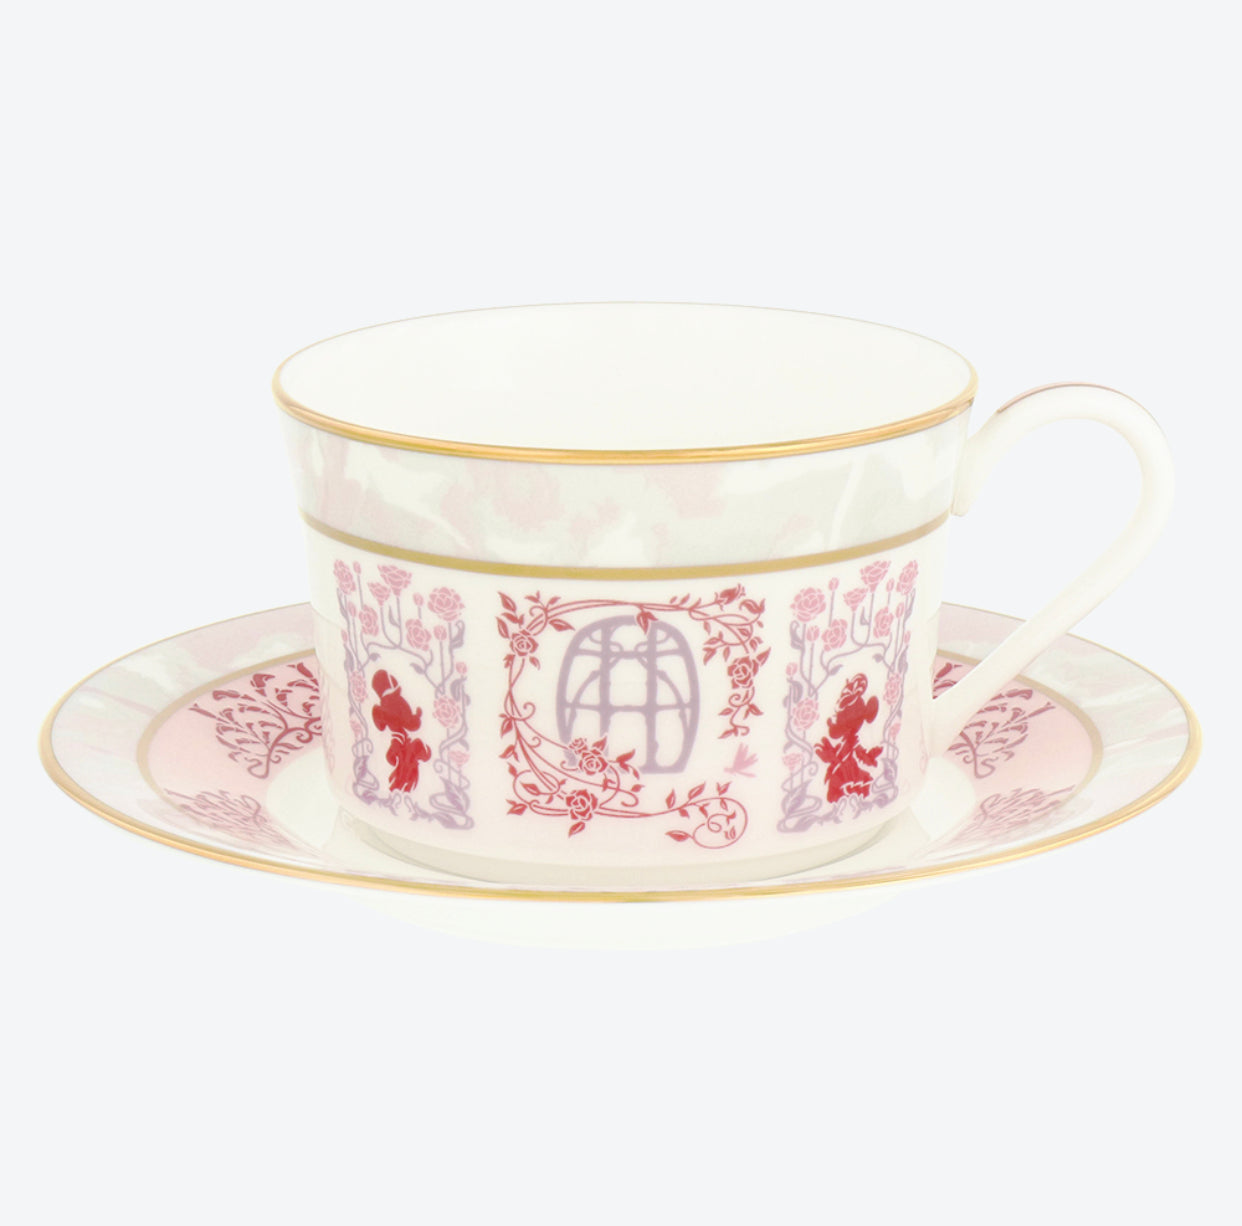 TDR - Fantasy Springs “Tokyo DisneySea Fantasy Springs Hotel” Collection x Mickey & Minnie Mouse Cup & Saucer Set